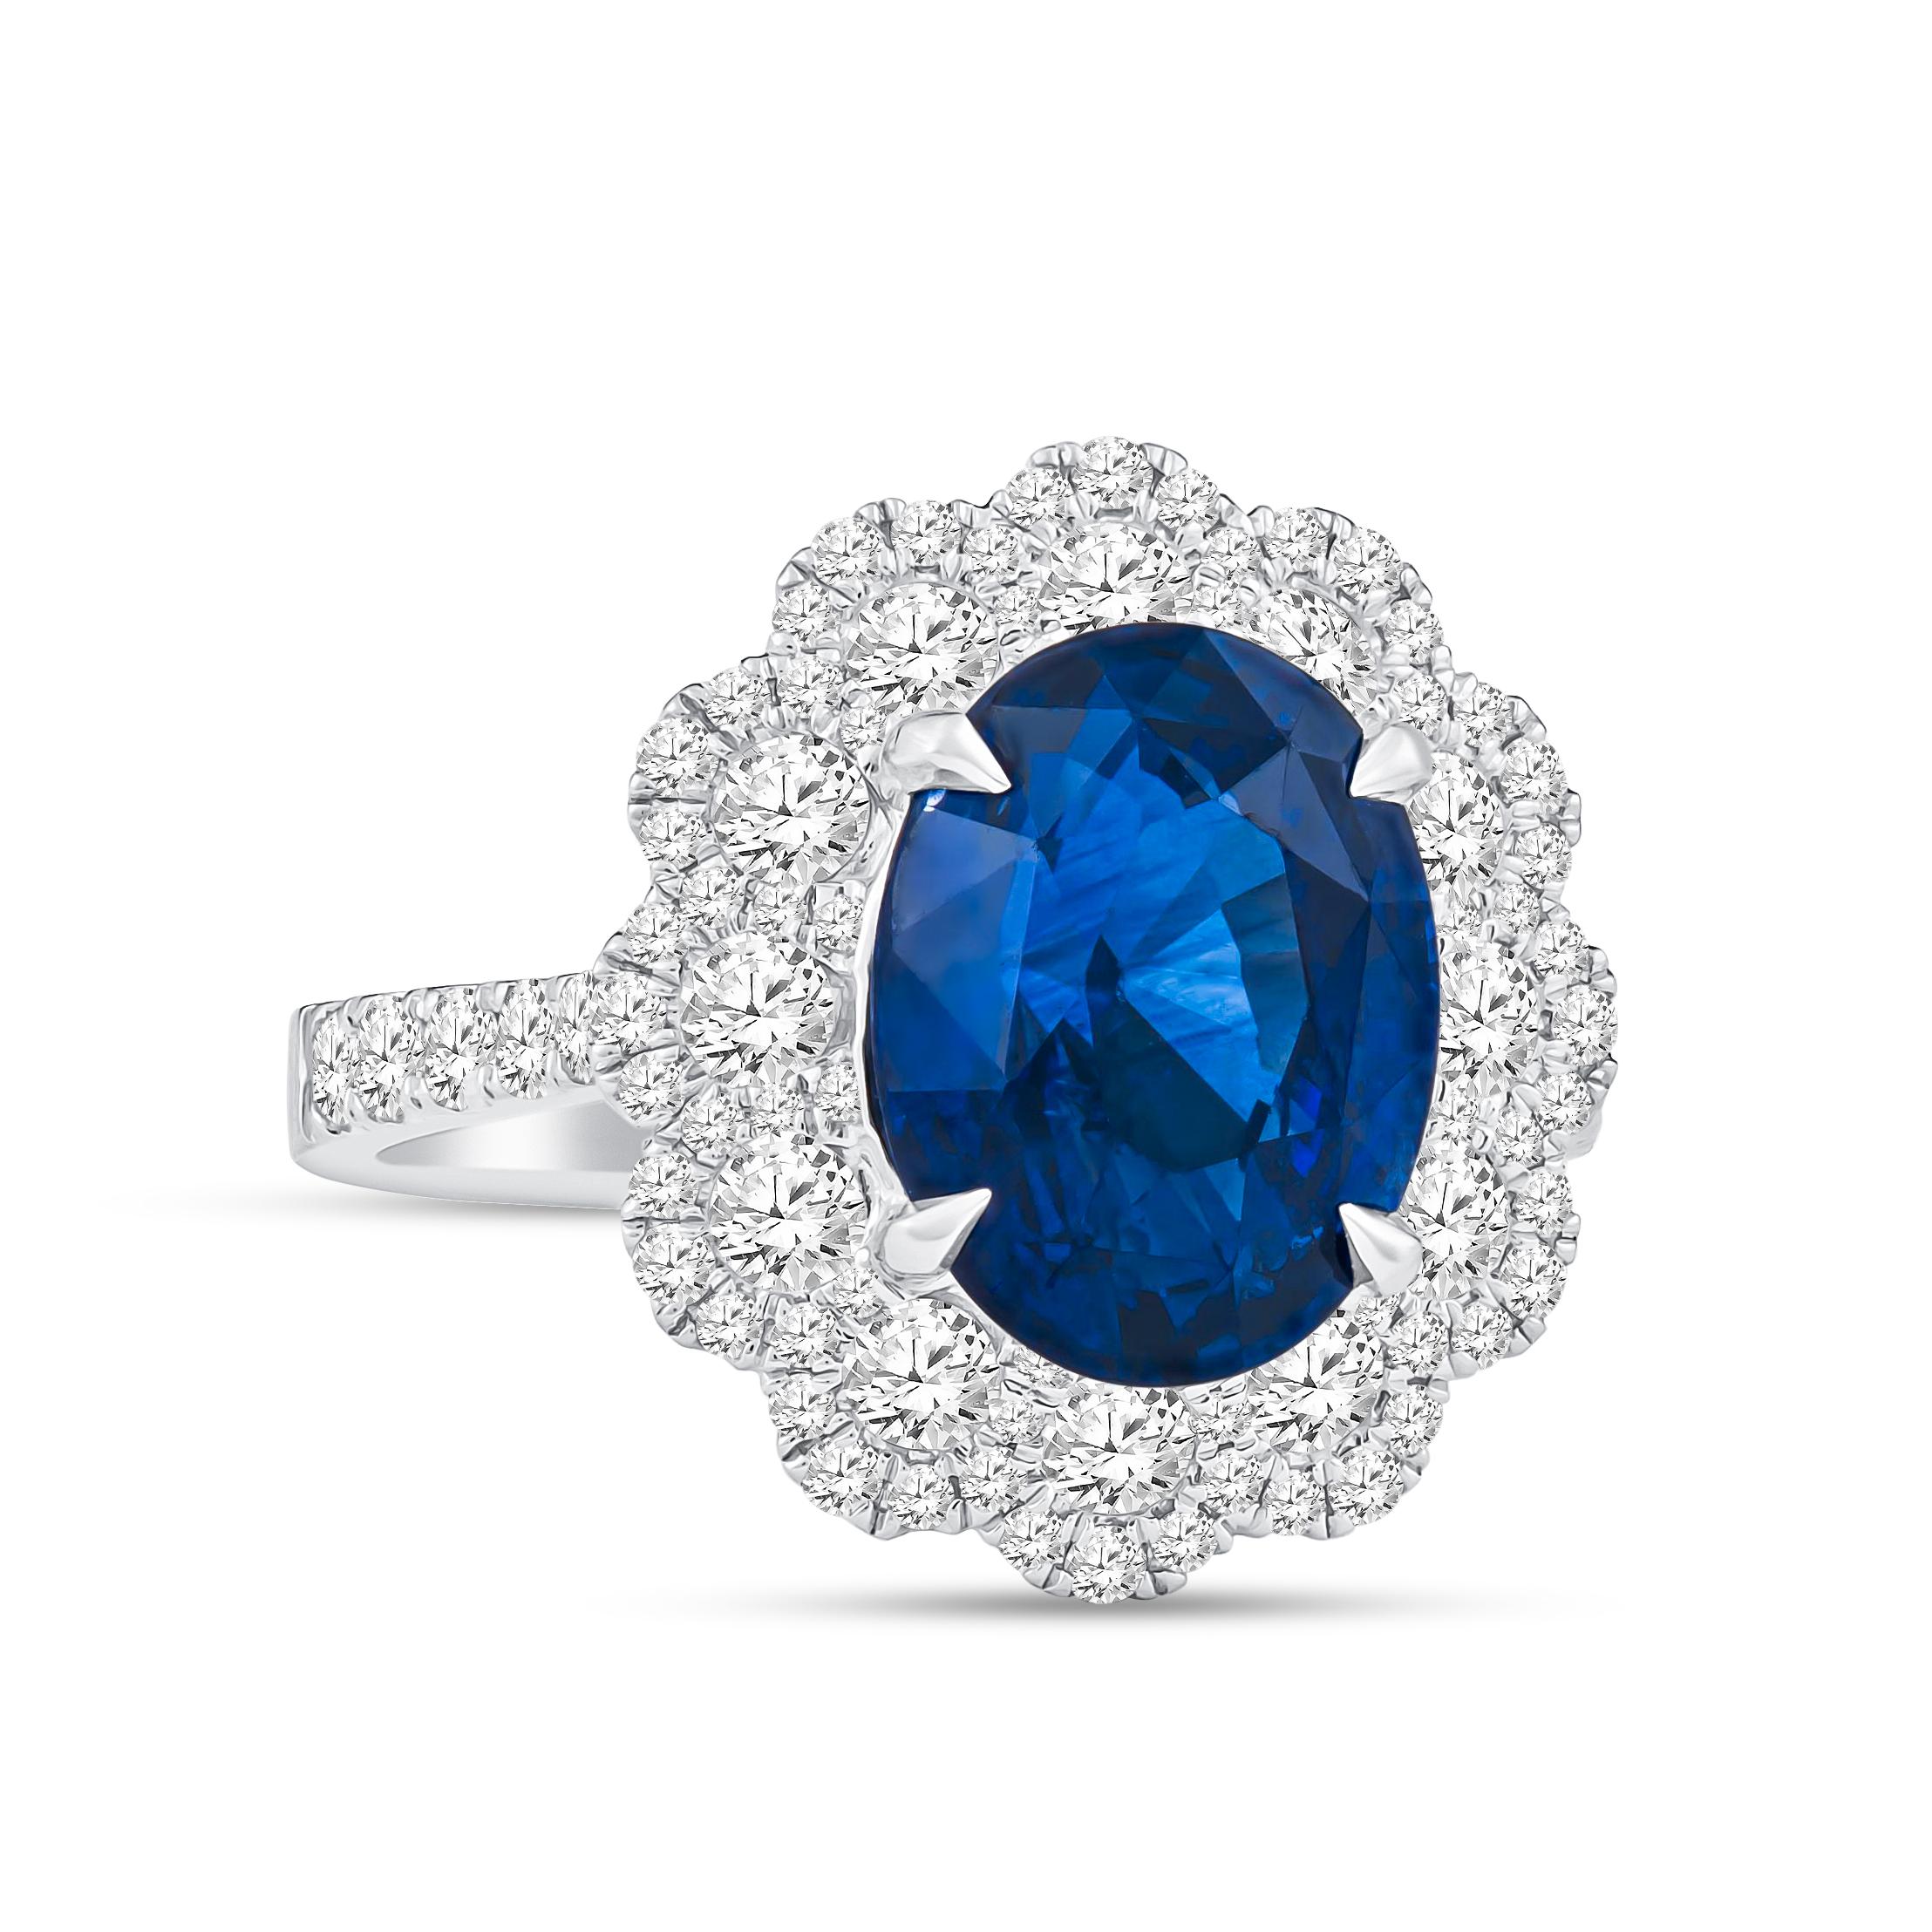 Gorgeous 18k white gold flower style ring spotlighting a GIA graded natural vivid blue 5.09 carat oval sapphire that is surrounded by 1.14 carats total of fine round brilliant cut diamonds. Crafted in a size 6.5 and may be resized to larger or